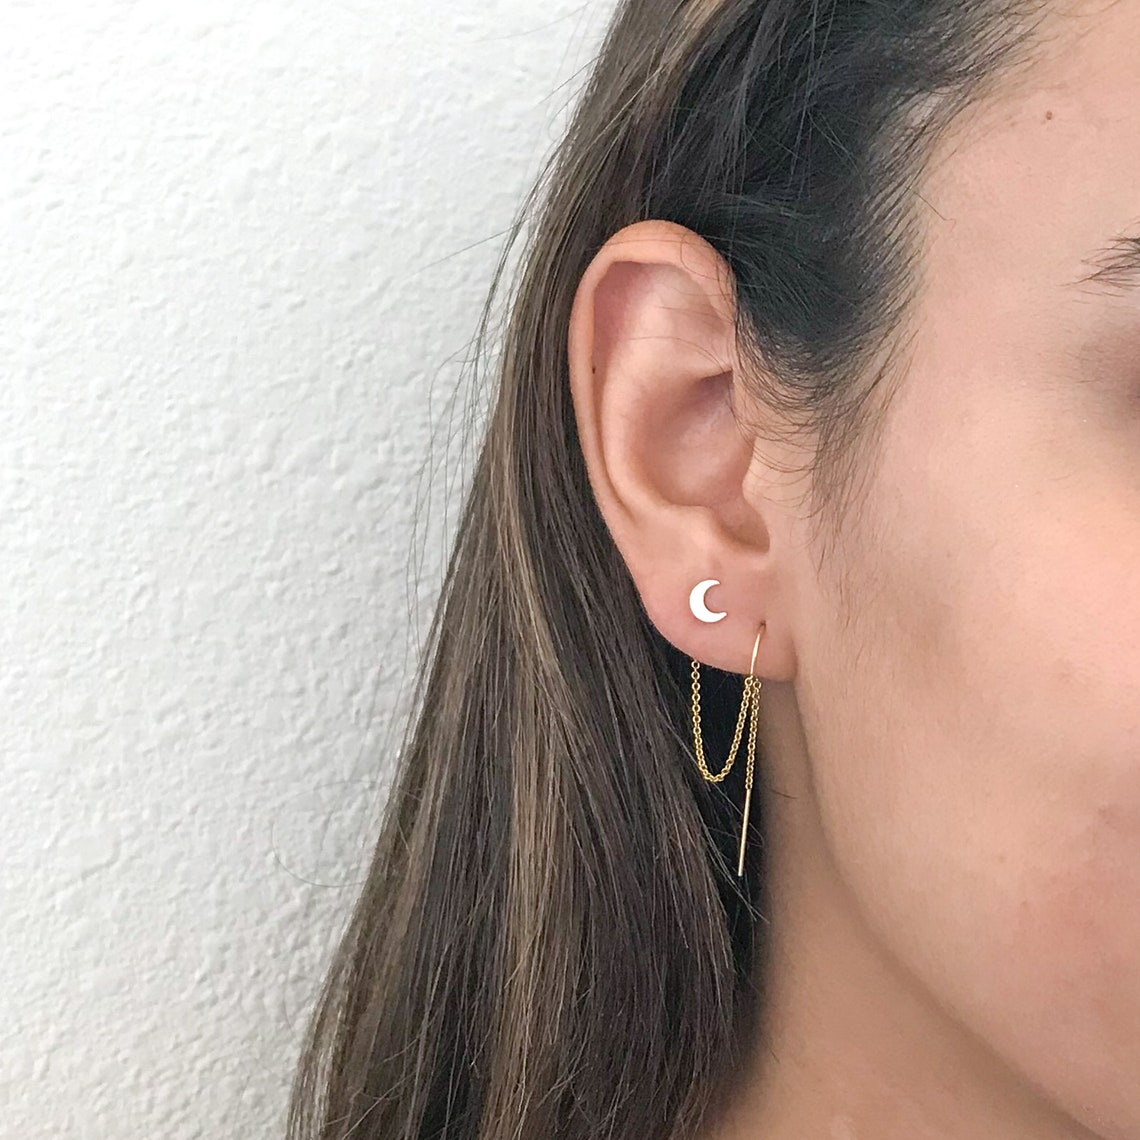 Amazon.com: Fake Double Hoop Earrings for Single Pierced Ears in 14K Gold  Filled, Rose Gold Filled or Solid Sterling Silver. Faux Double Mini Ear  Huggie Hoops : Handmade Products